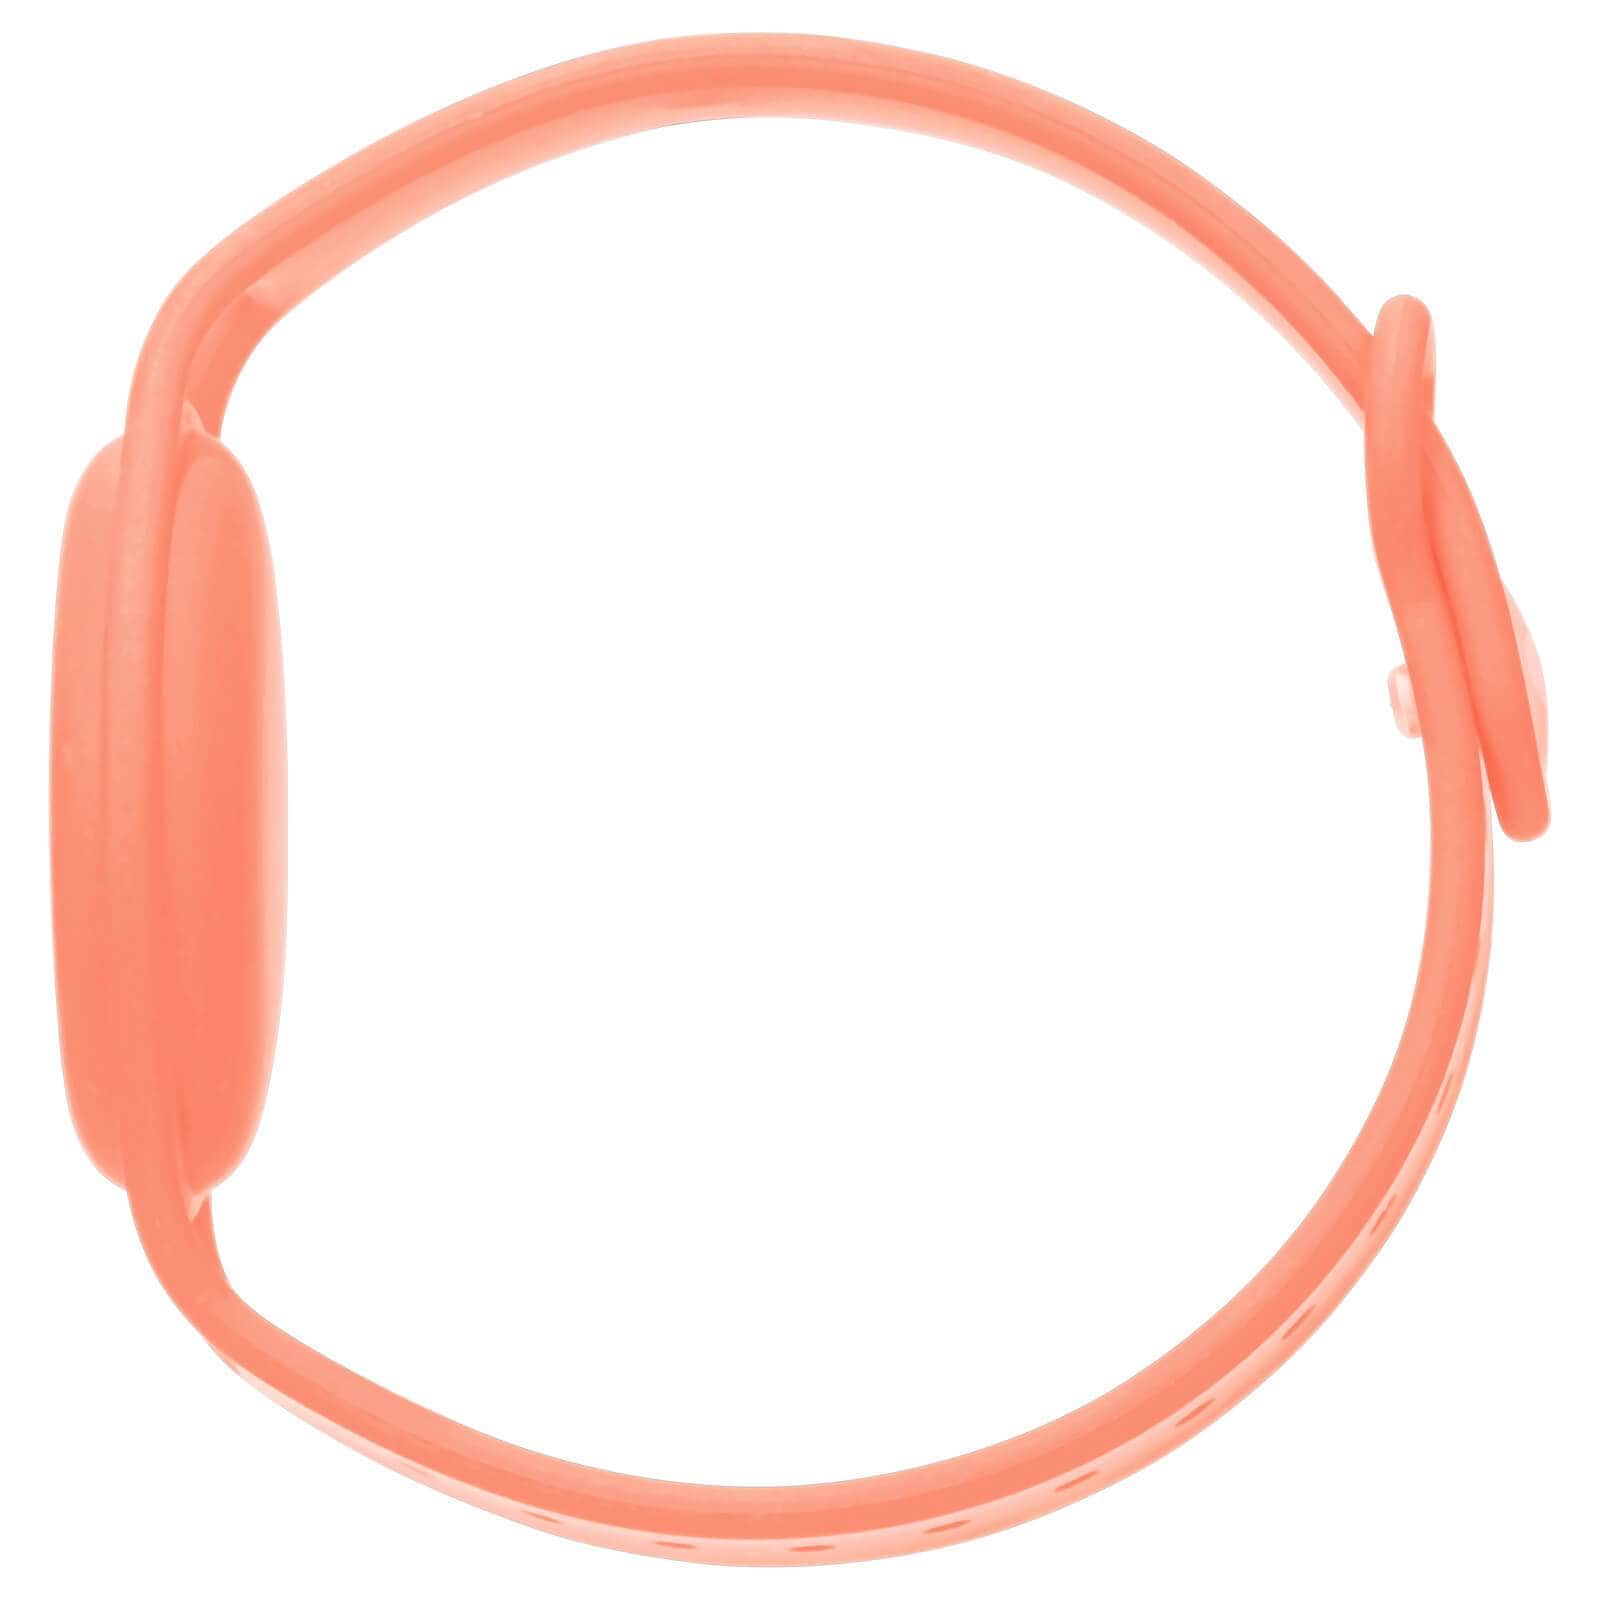 AirTag case fits around wrist and fastens securely. color::Coral